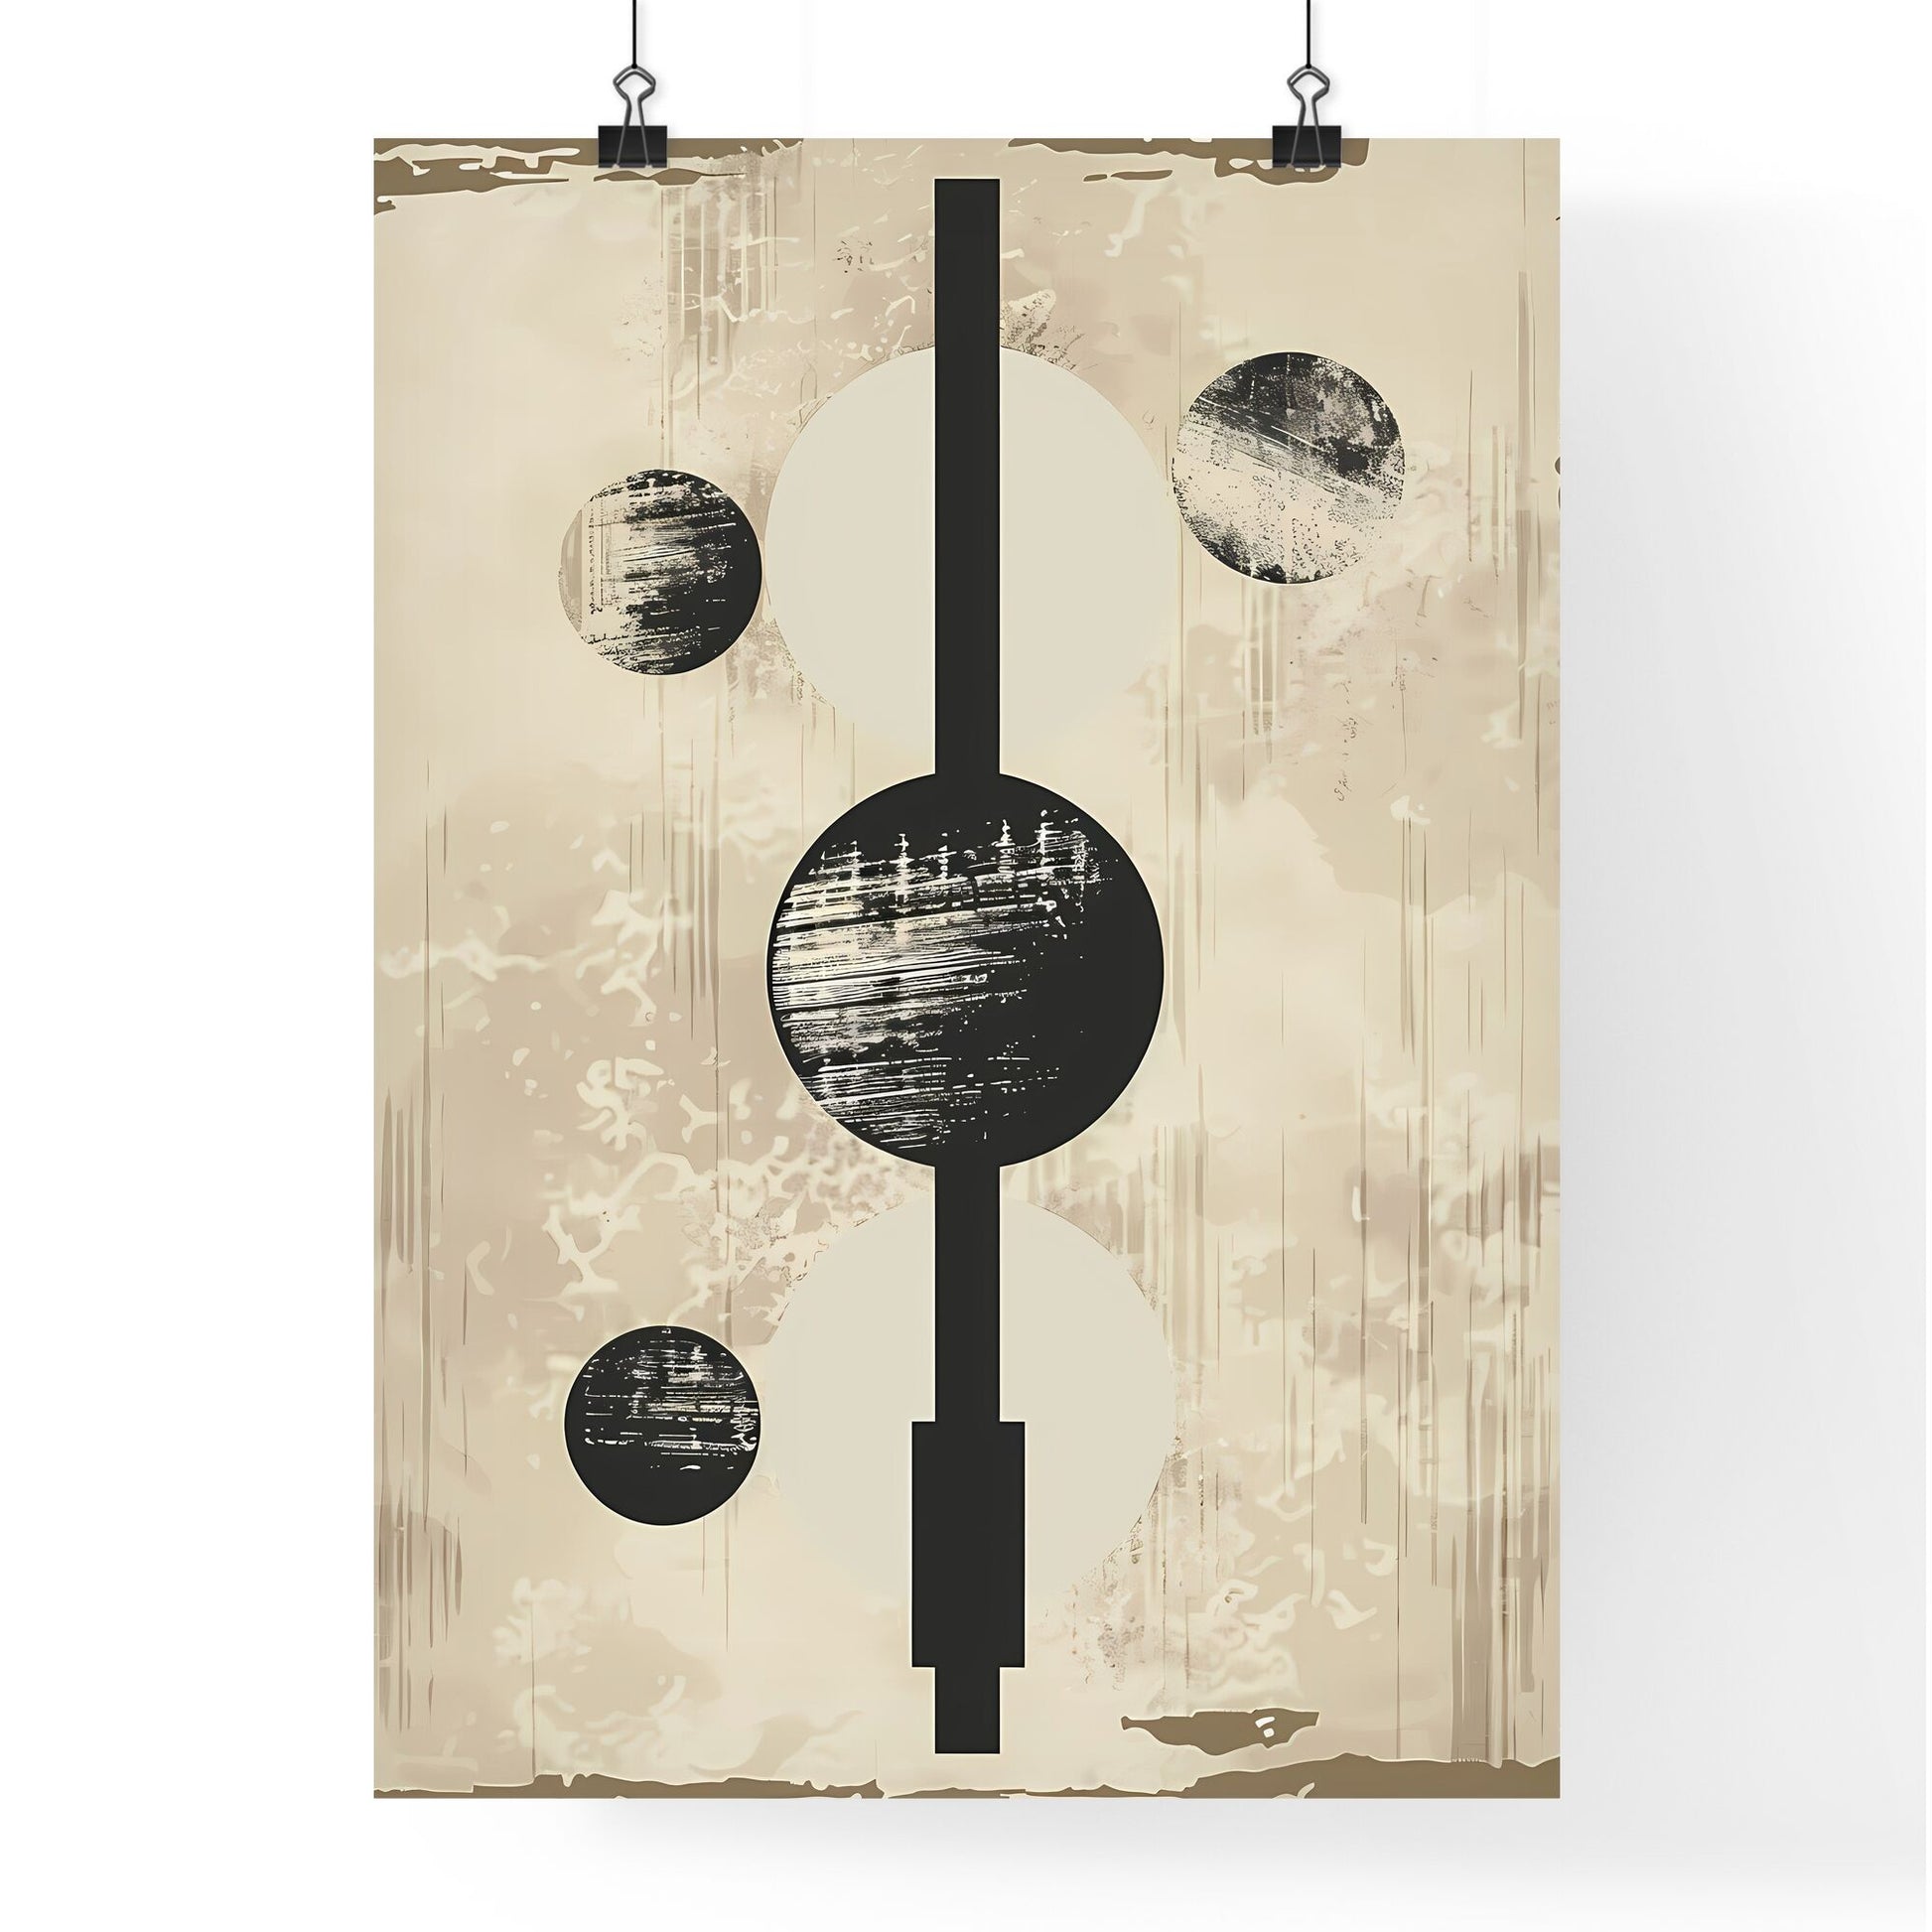 Bauhaus-Inspired Abstract Ink Painting: Black and White Circle and Line Logo Mark on Parchment Background Default Title